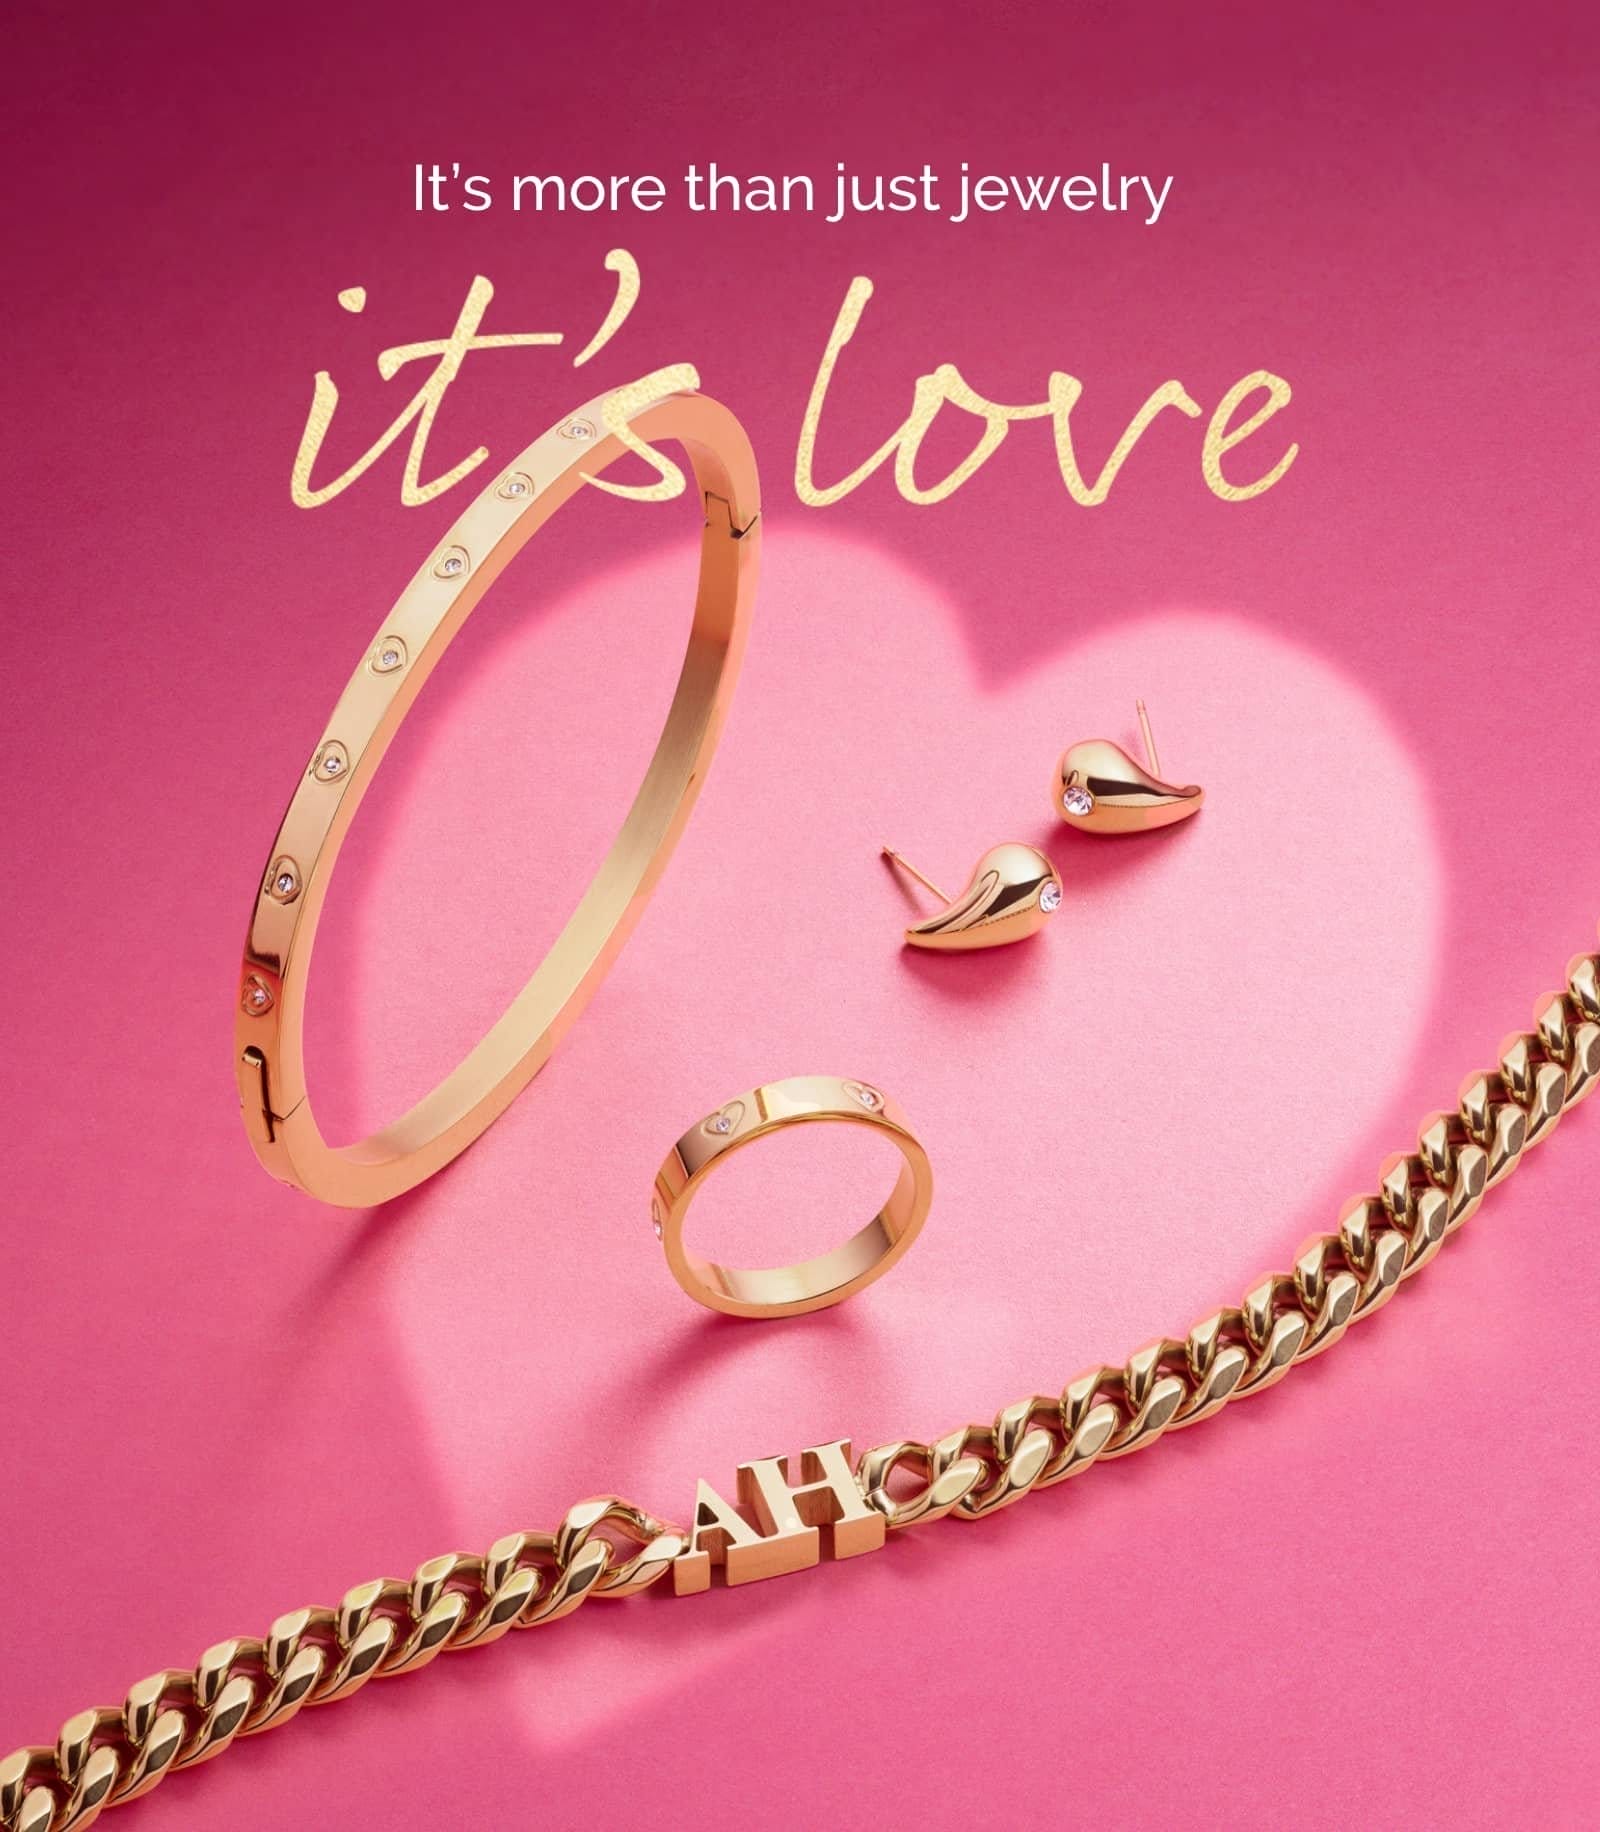 It's more than just jewelry